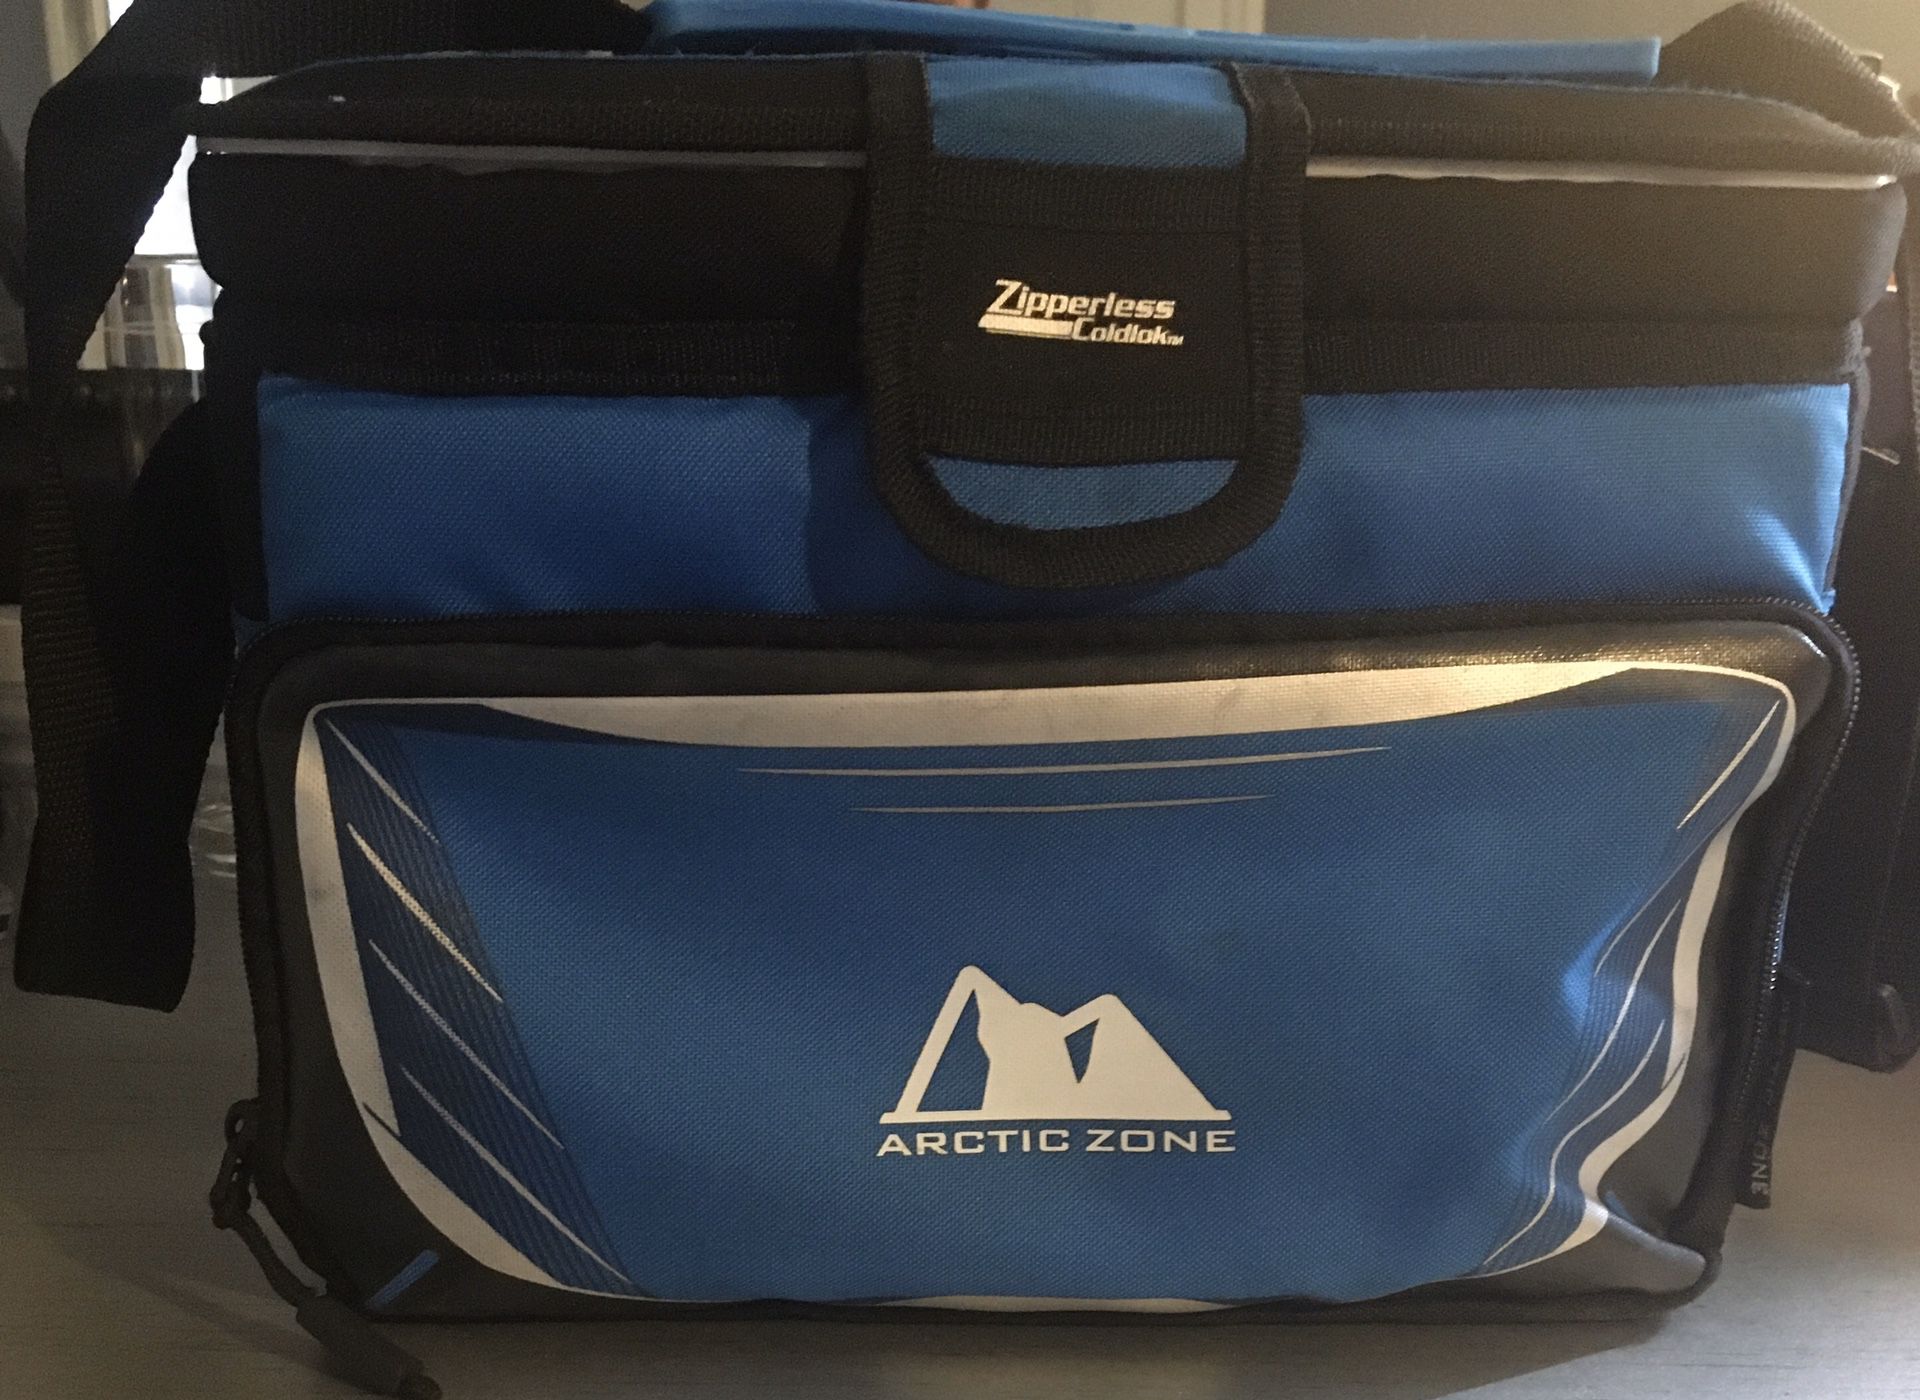 Arctic Zone mini cooler With zipper less cold lock and shoulder strap In great condition